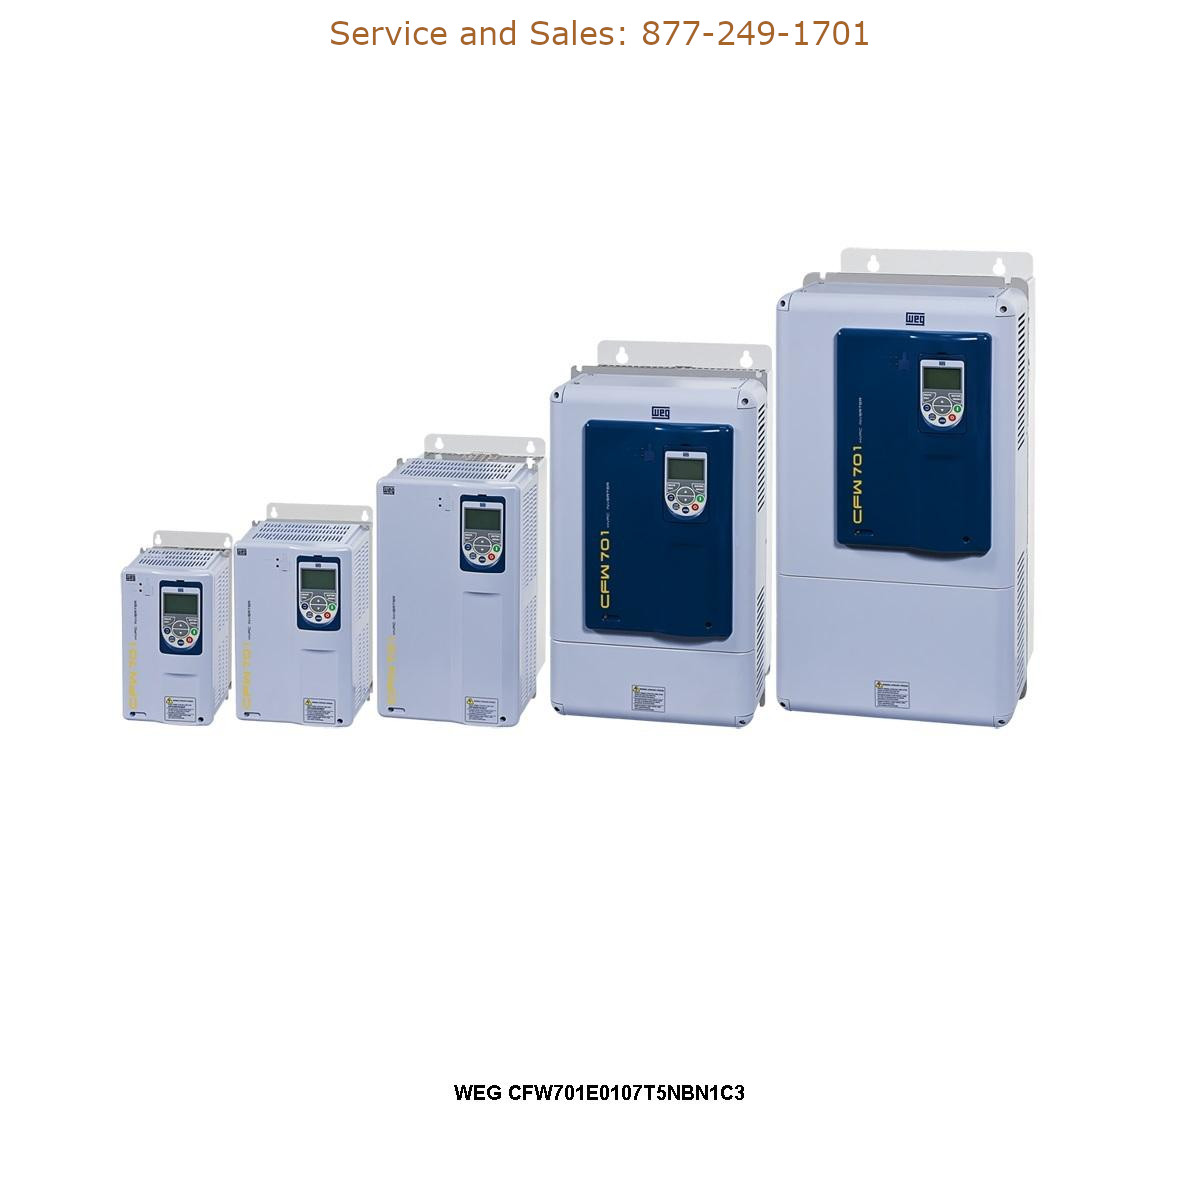 WEG CFW701E0107T5NBN1C3 WEG Model Number CFW701E0107T5NBN1C3 WEG Drives, Variable Speed Drives Repair Service, Troubleshooting, Replacement Parts https://gesrepair.com/wp-content/uploads/2022/WEG/WEG_CFW701E0107T5NBN1C3_Drives_Variable_Speed_Drives.jpg